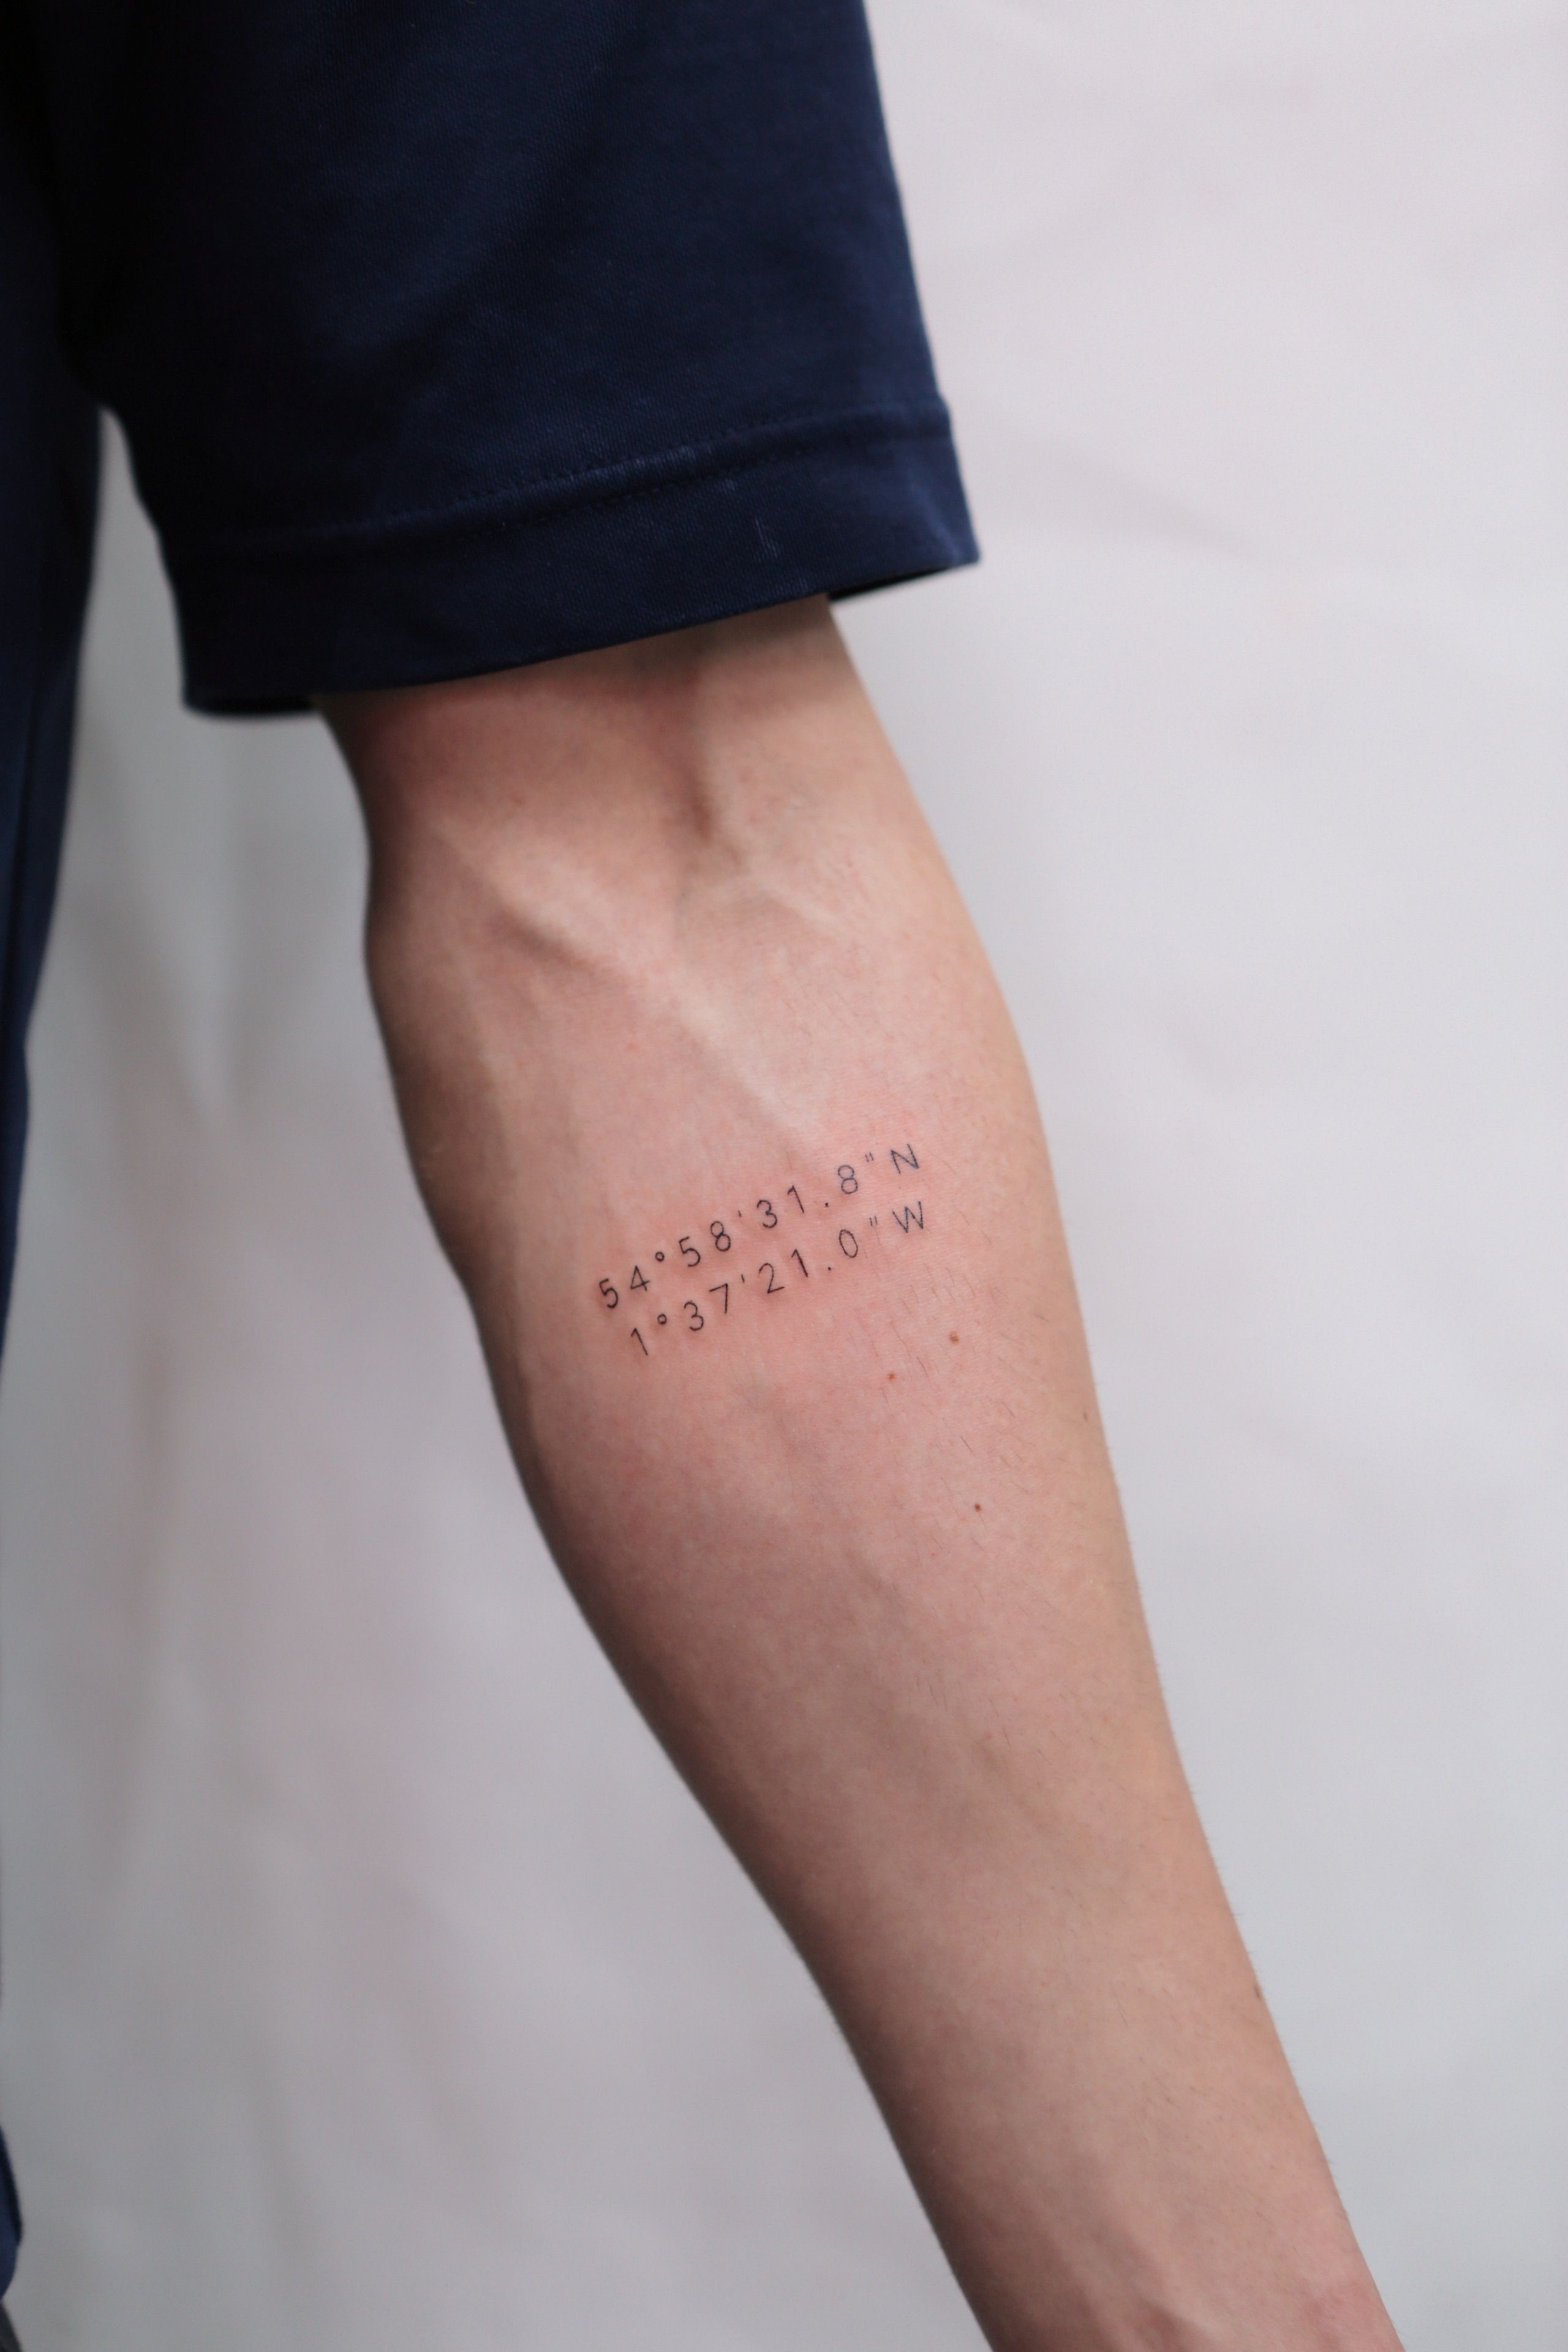 Coordinates Tattoo a Perfect Way To Mark a Special Place